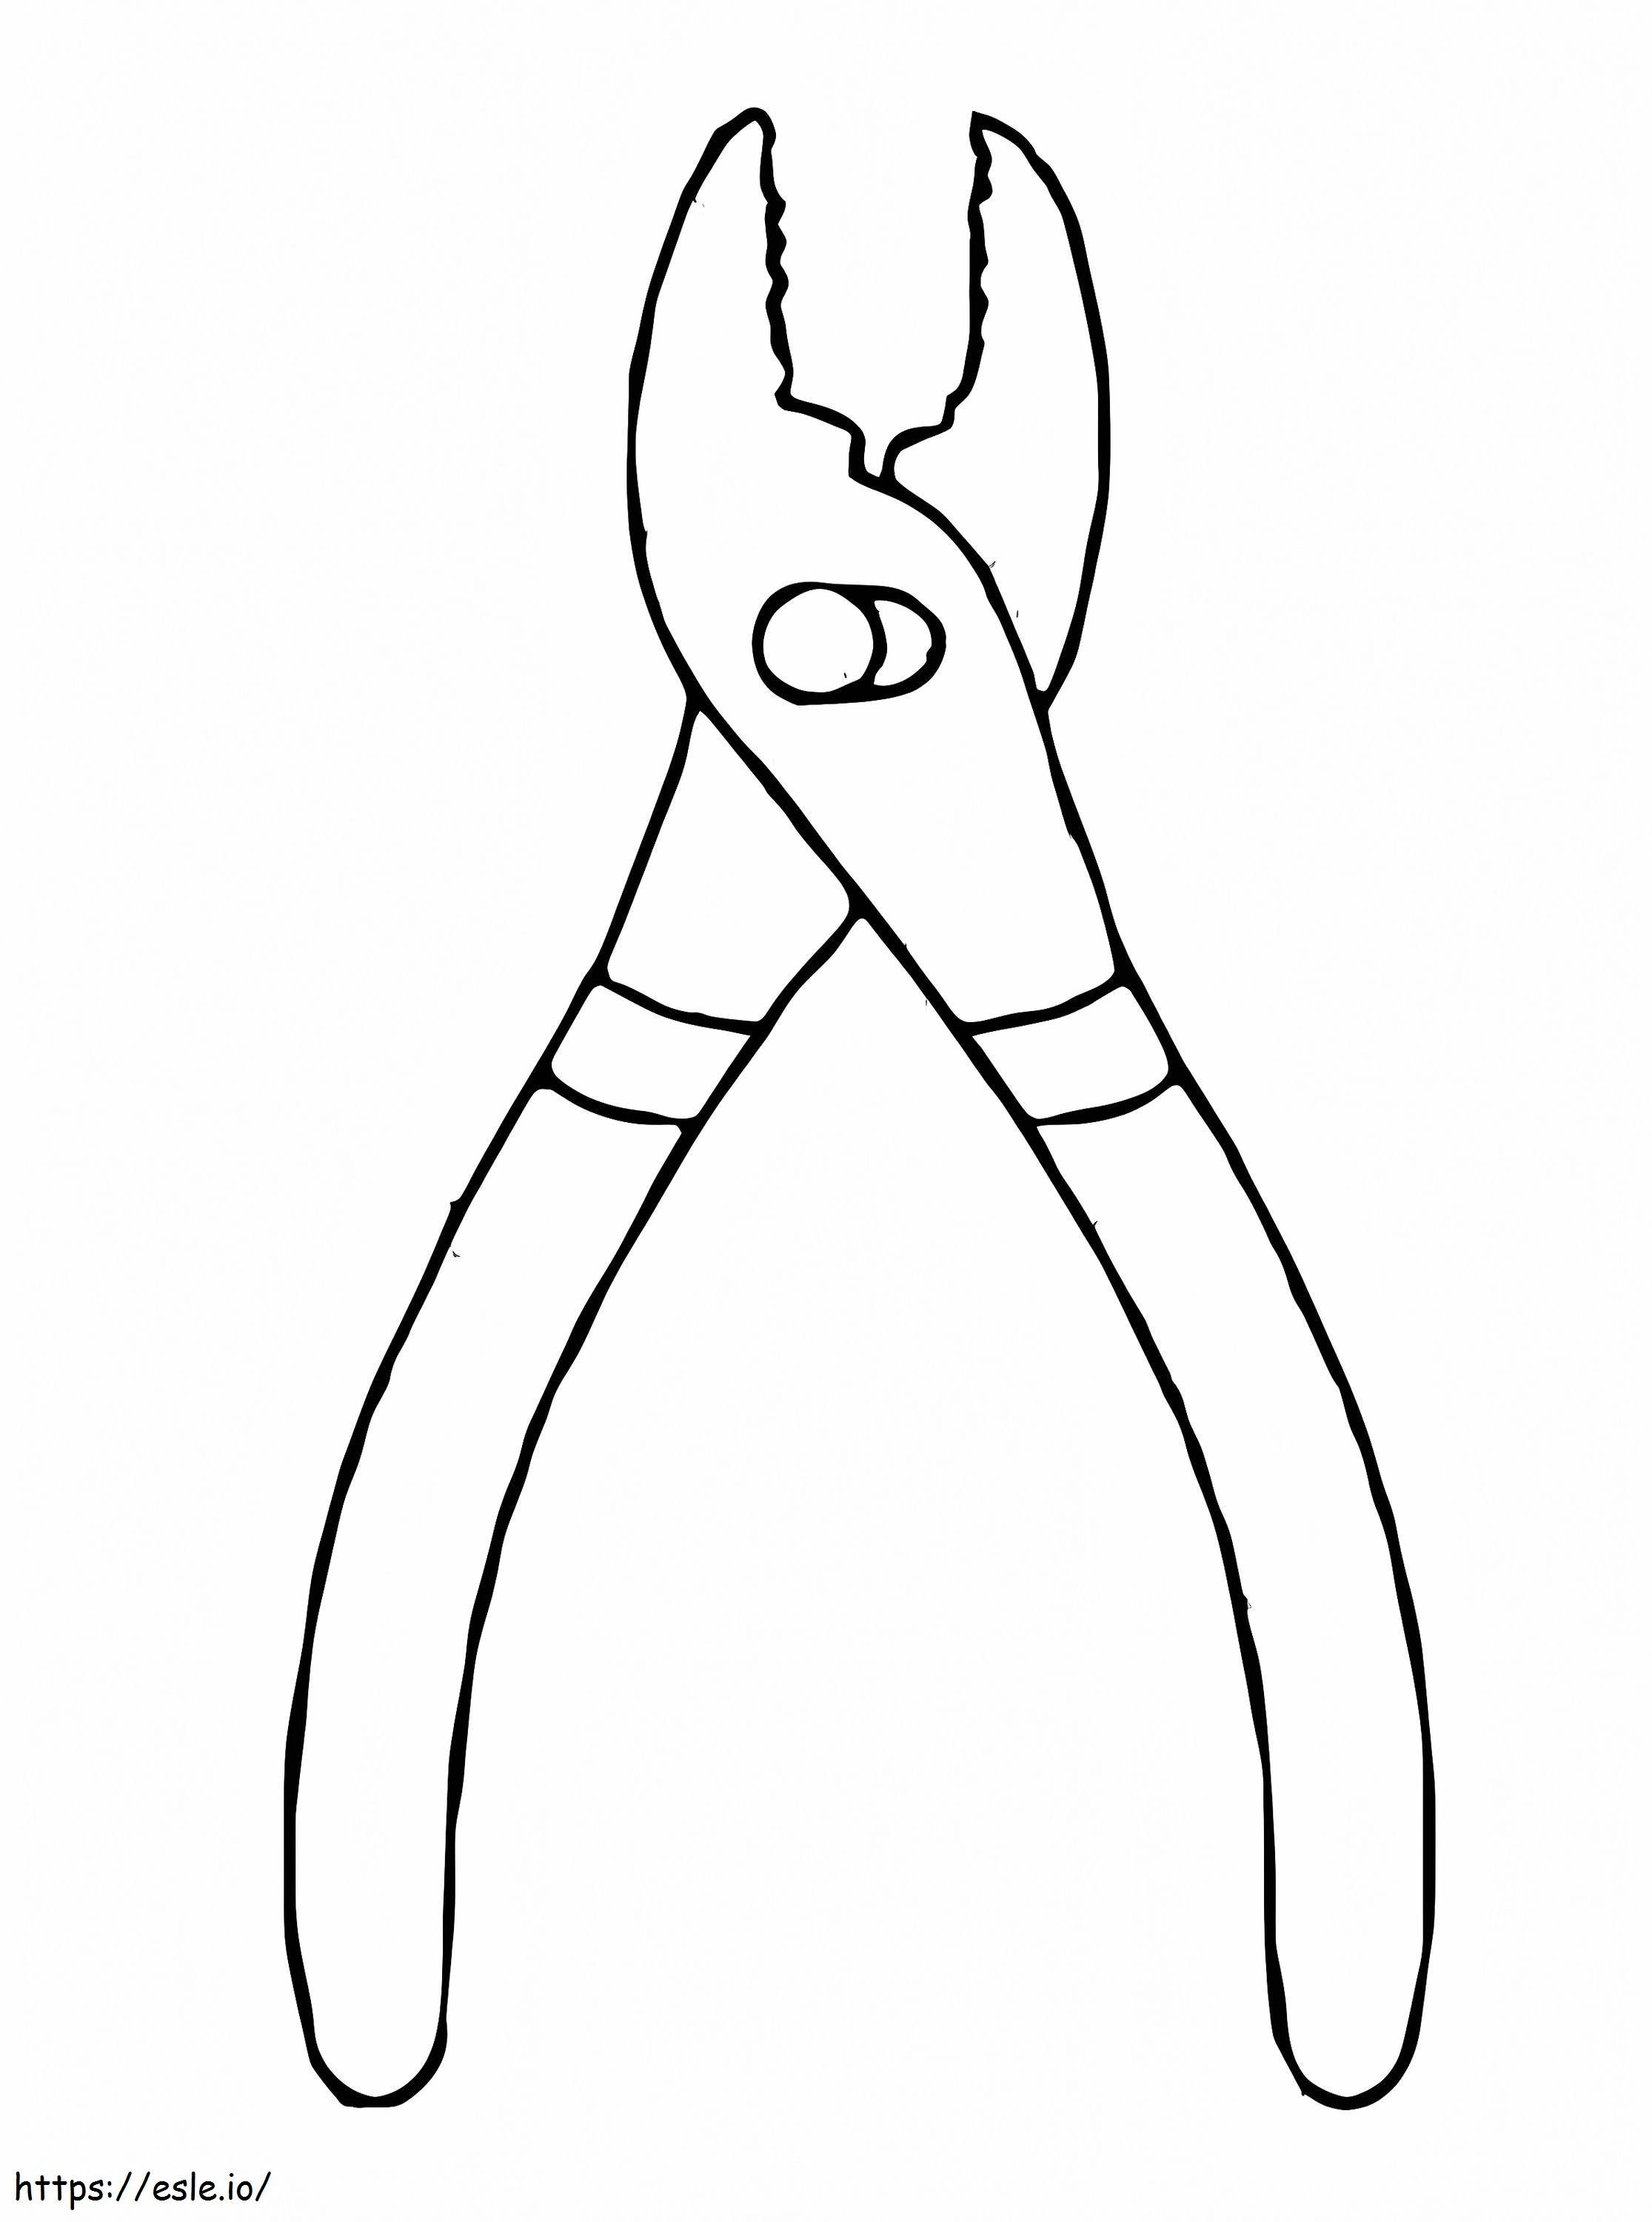 Wire Pliers coloring page